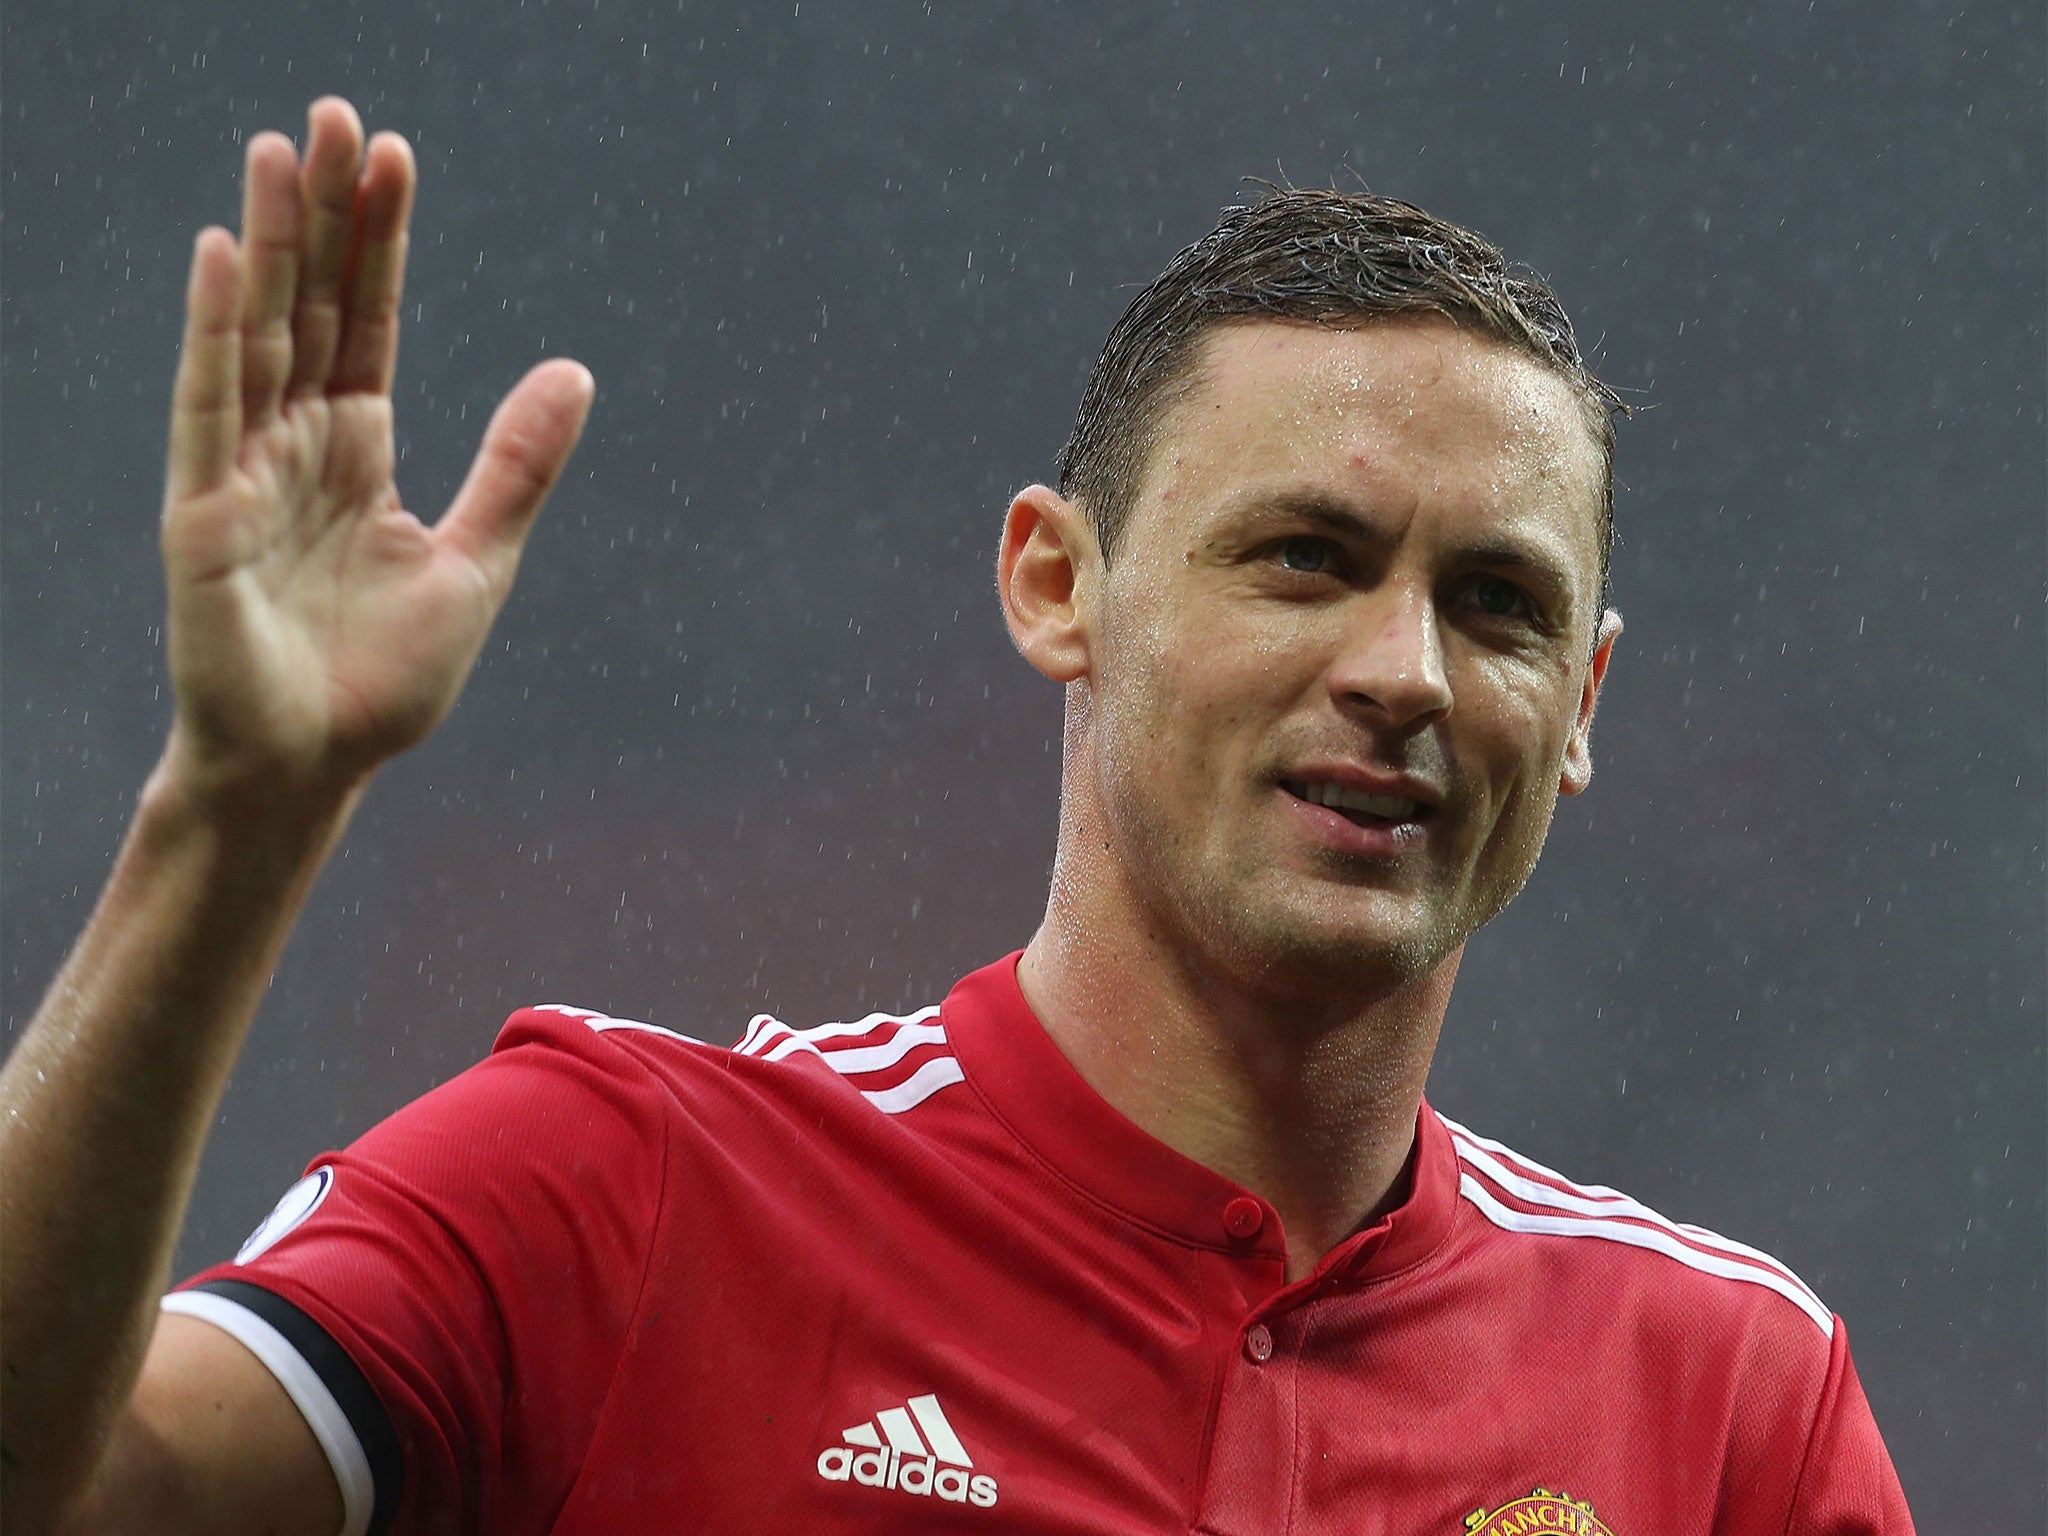 Nemanja Matic was solid for United against Spurs